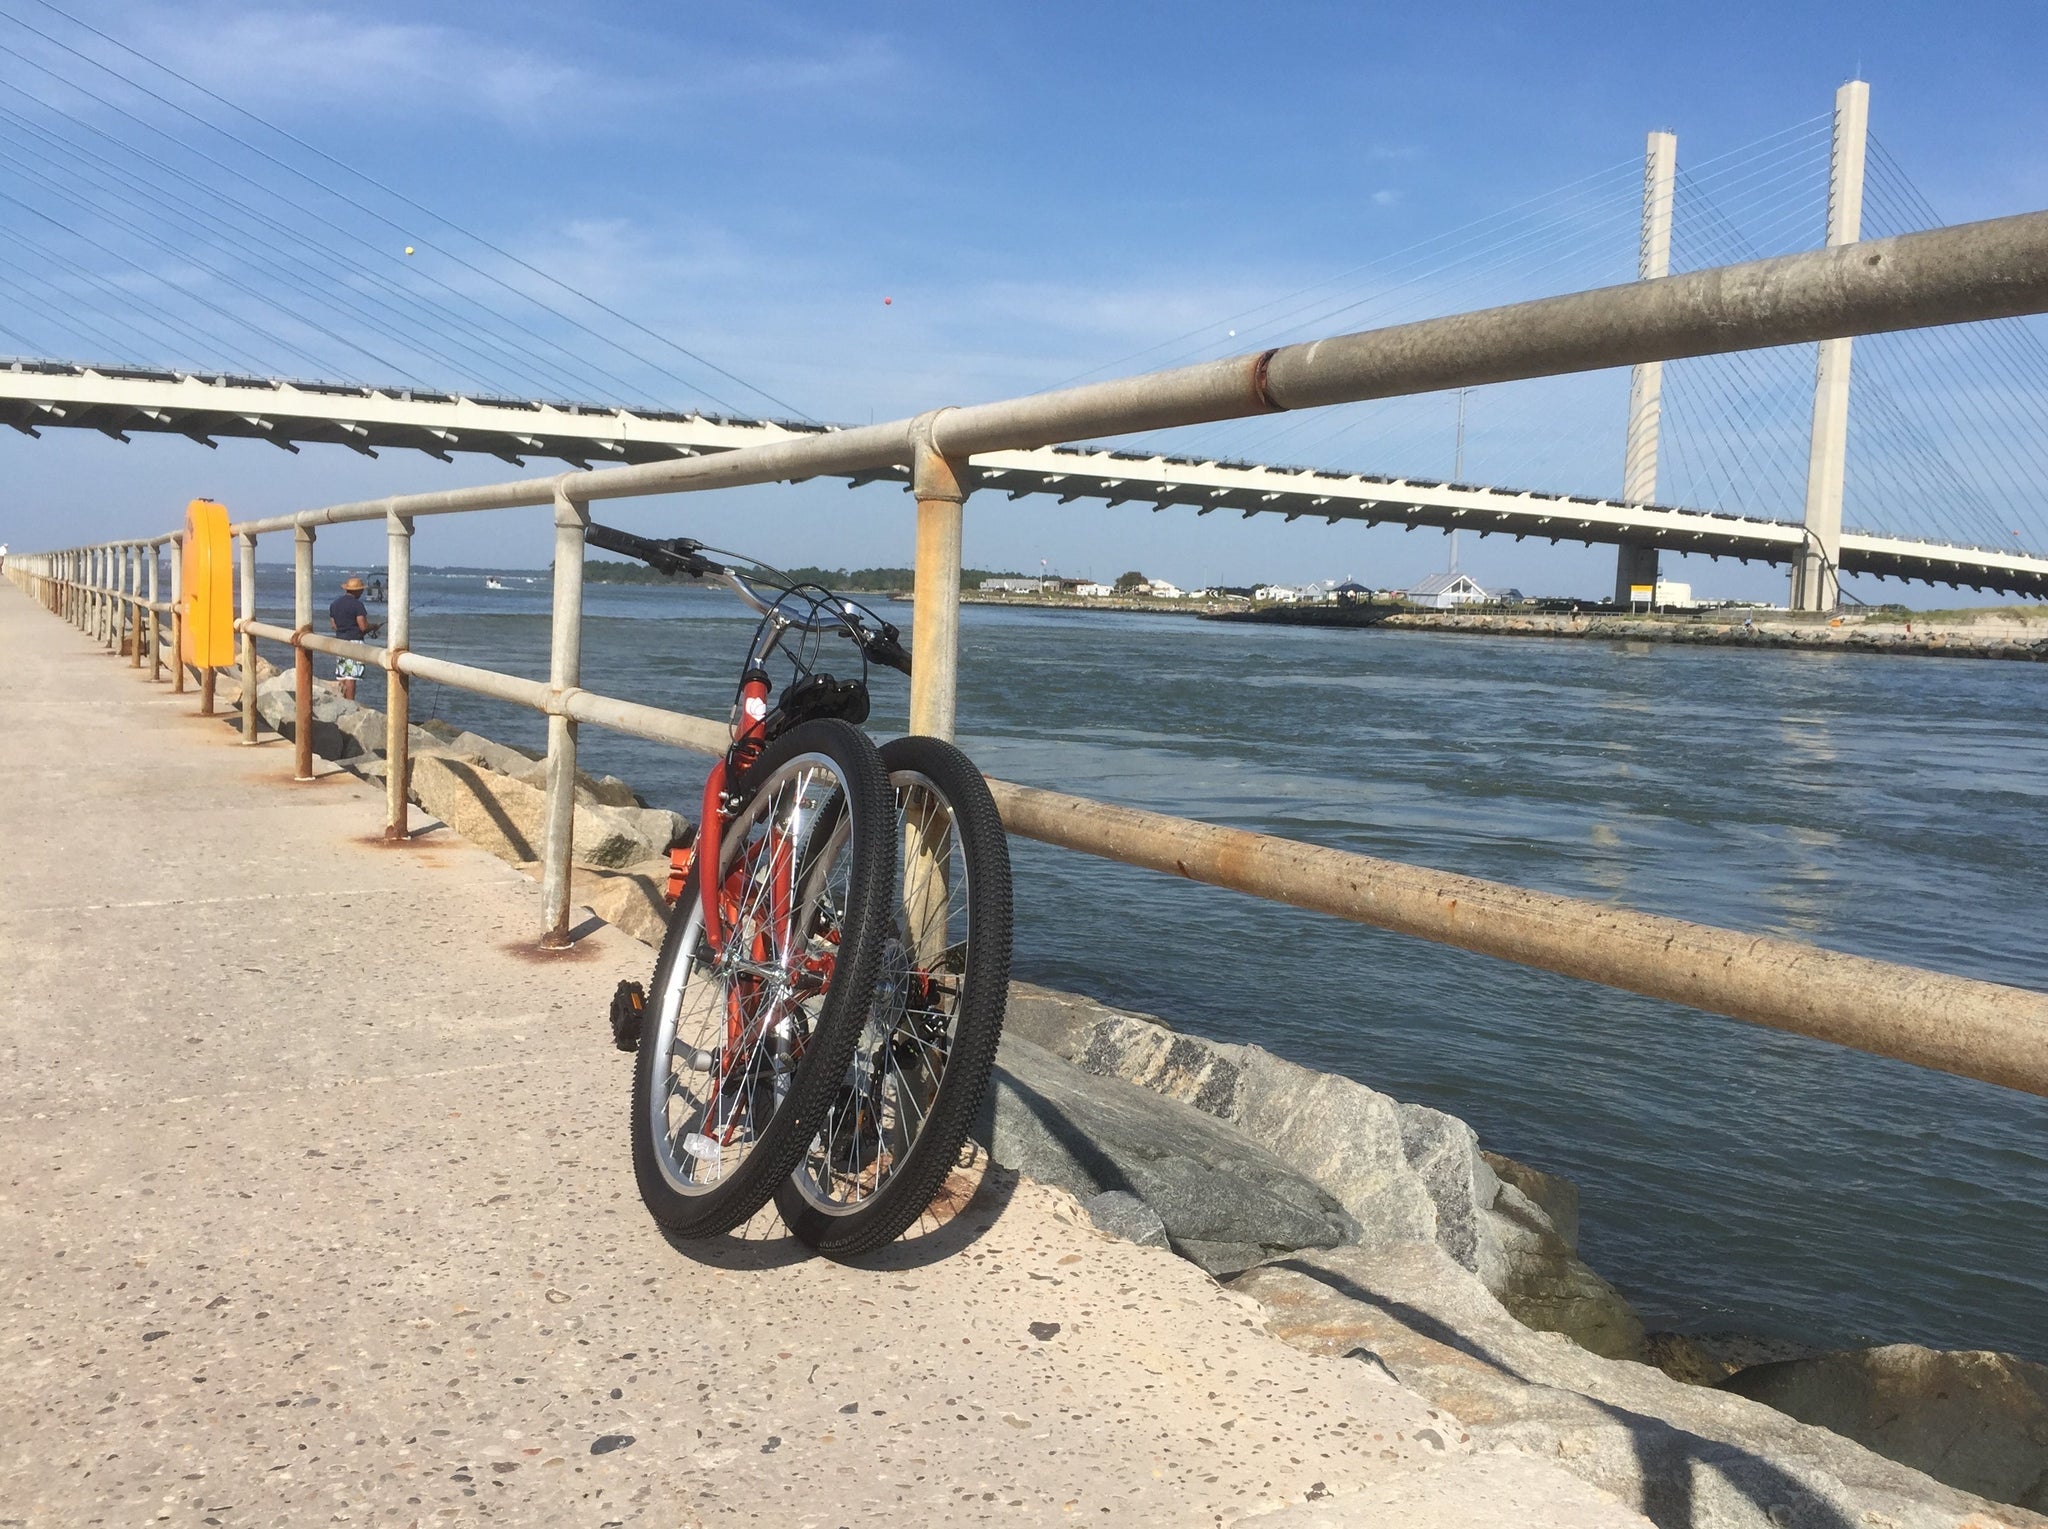 Orange colored folding bike alongside a body of water with bridge in the background.